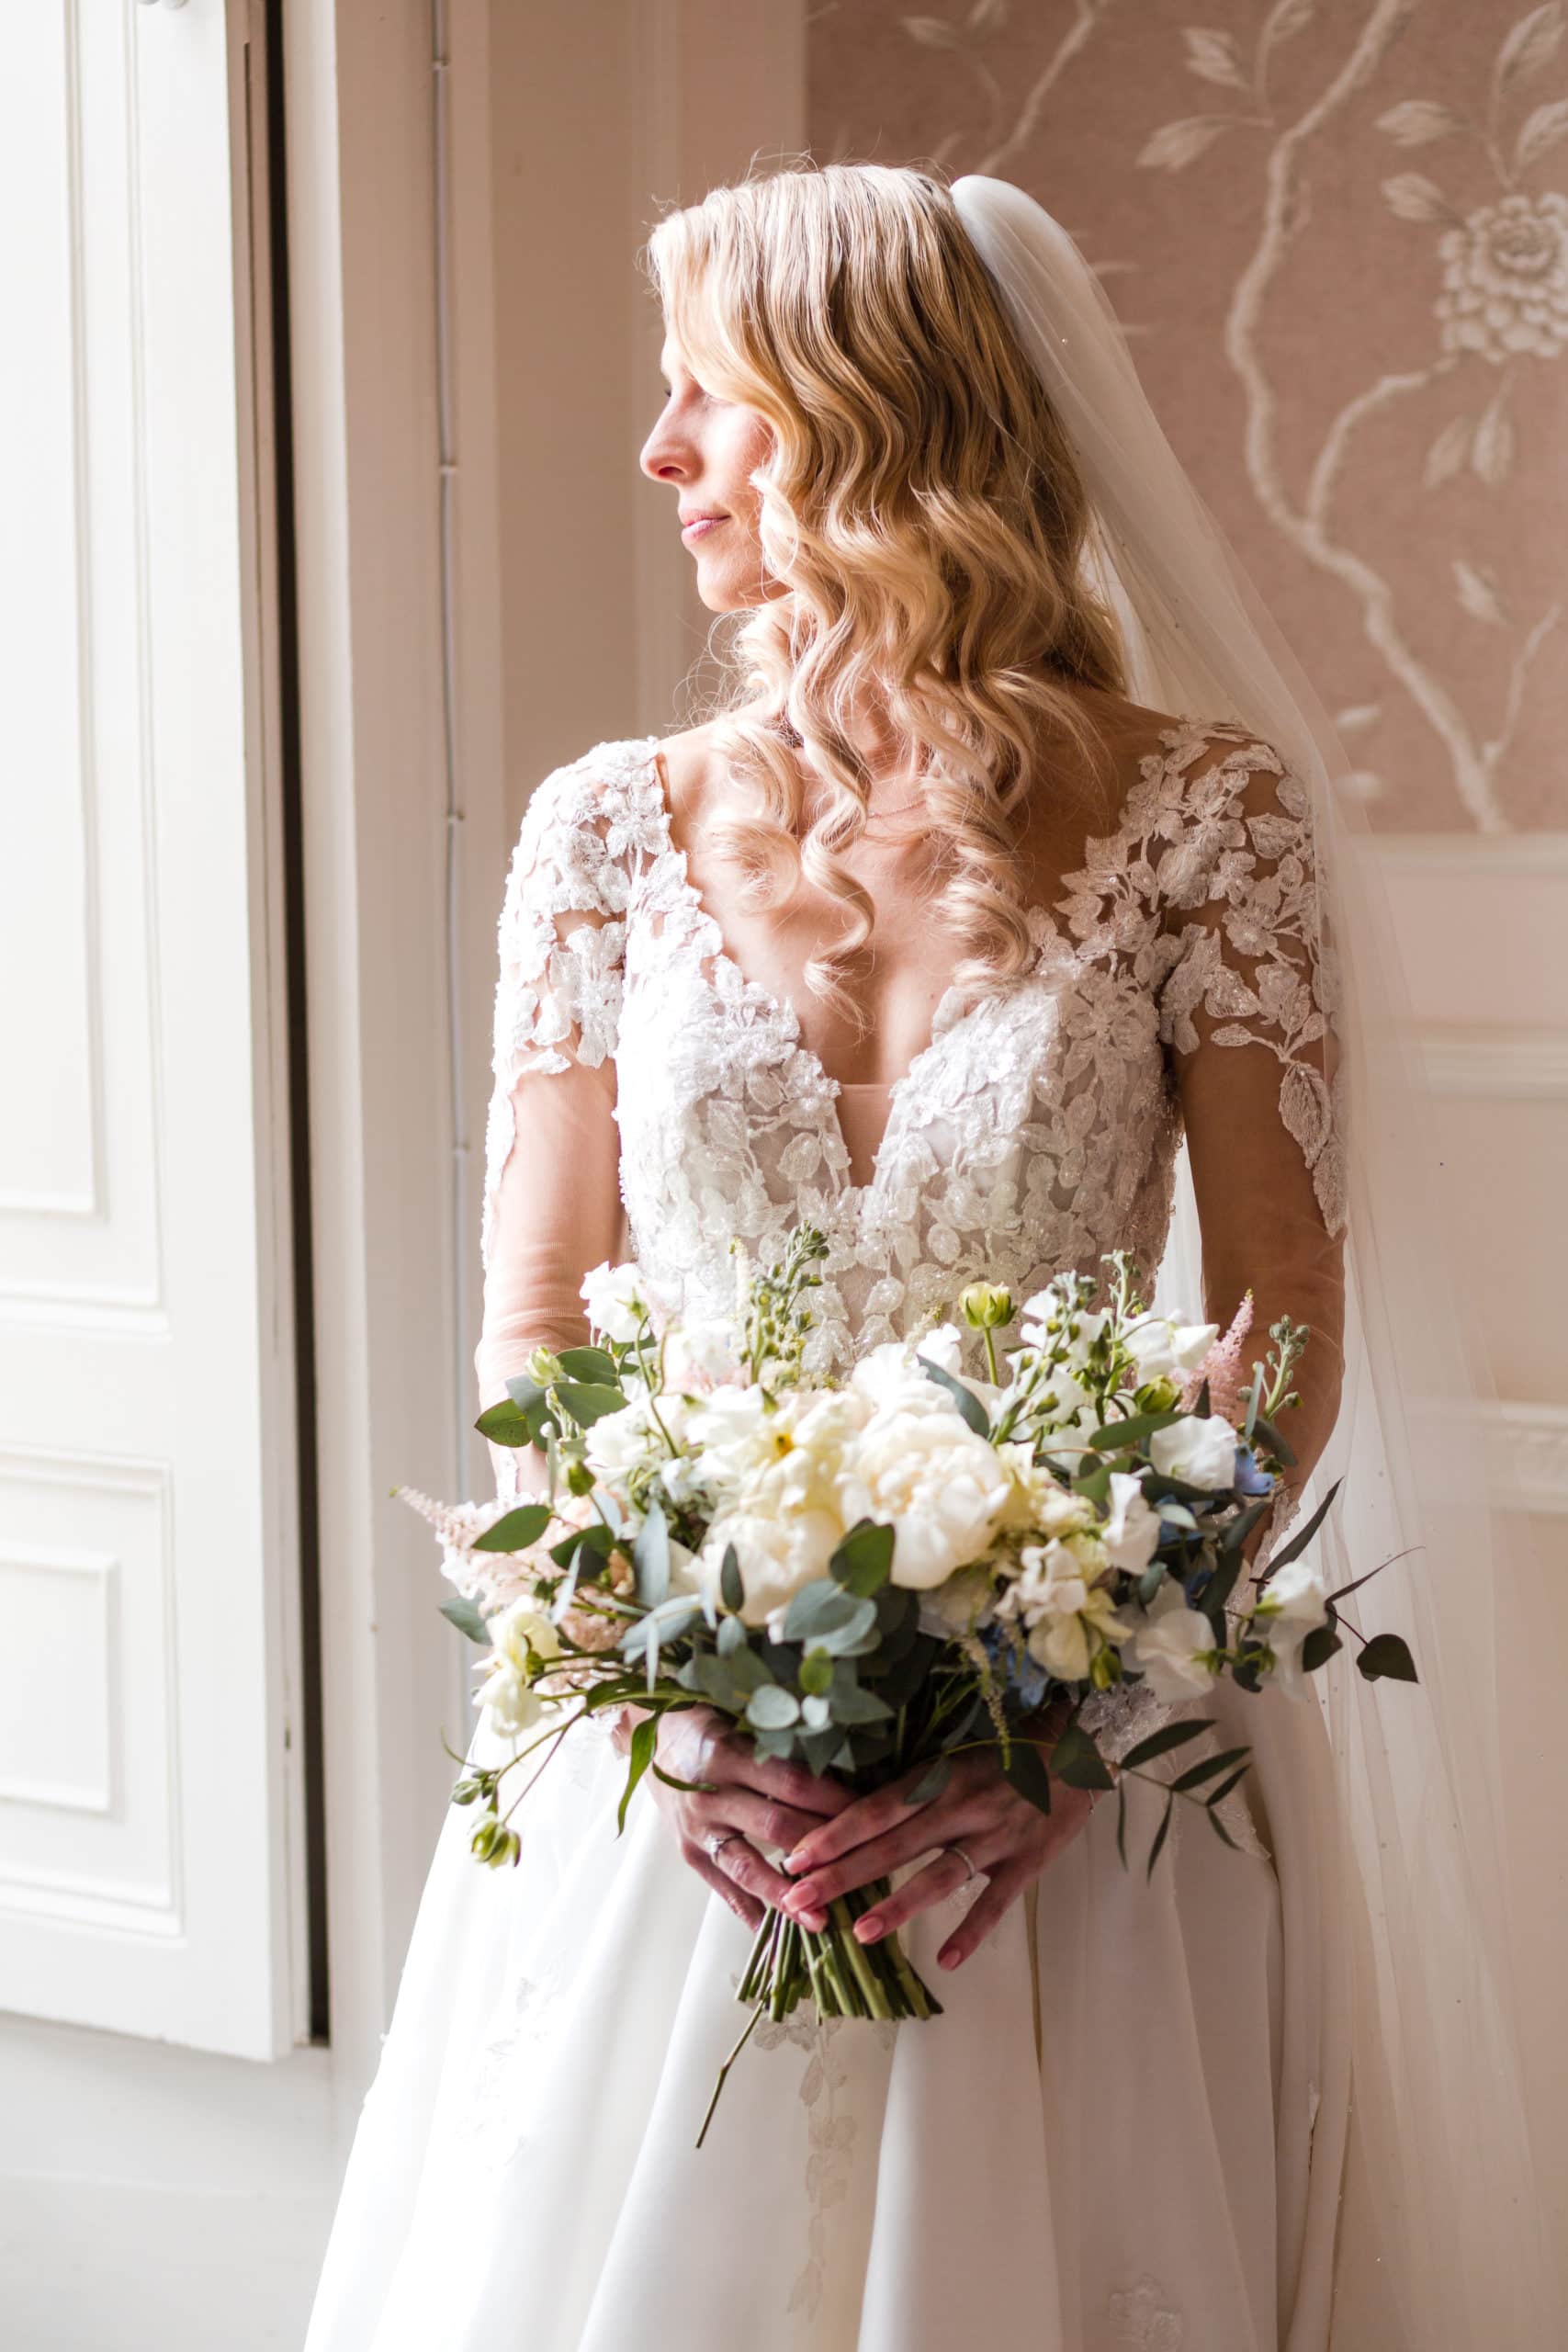 window lit portrait of a bride wearing Justin Alexander illusion sleeve wedding dress. Bride has blonde Hollywood wave hairstyle and holds white and green bouquet 